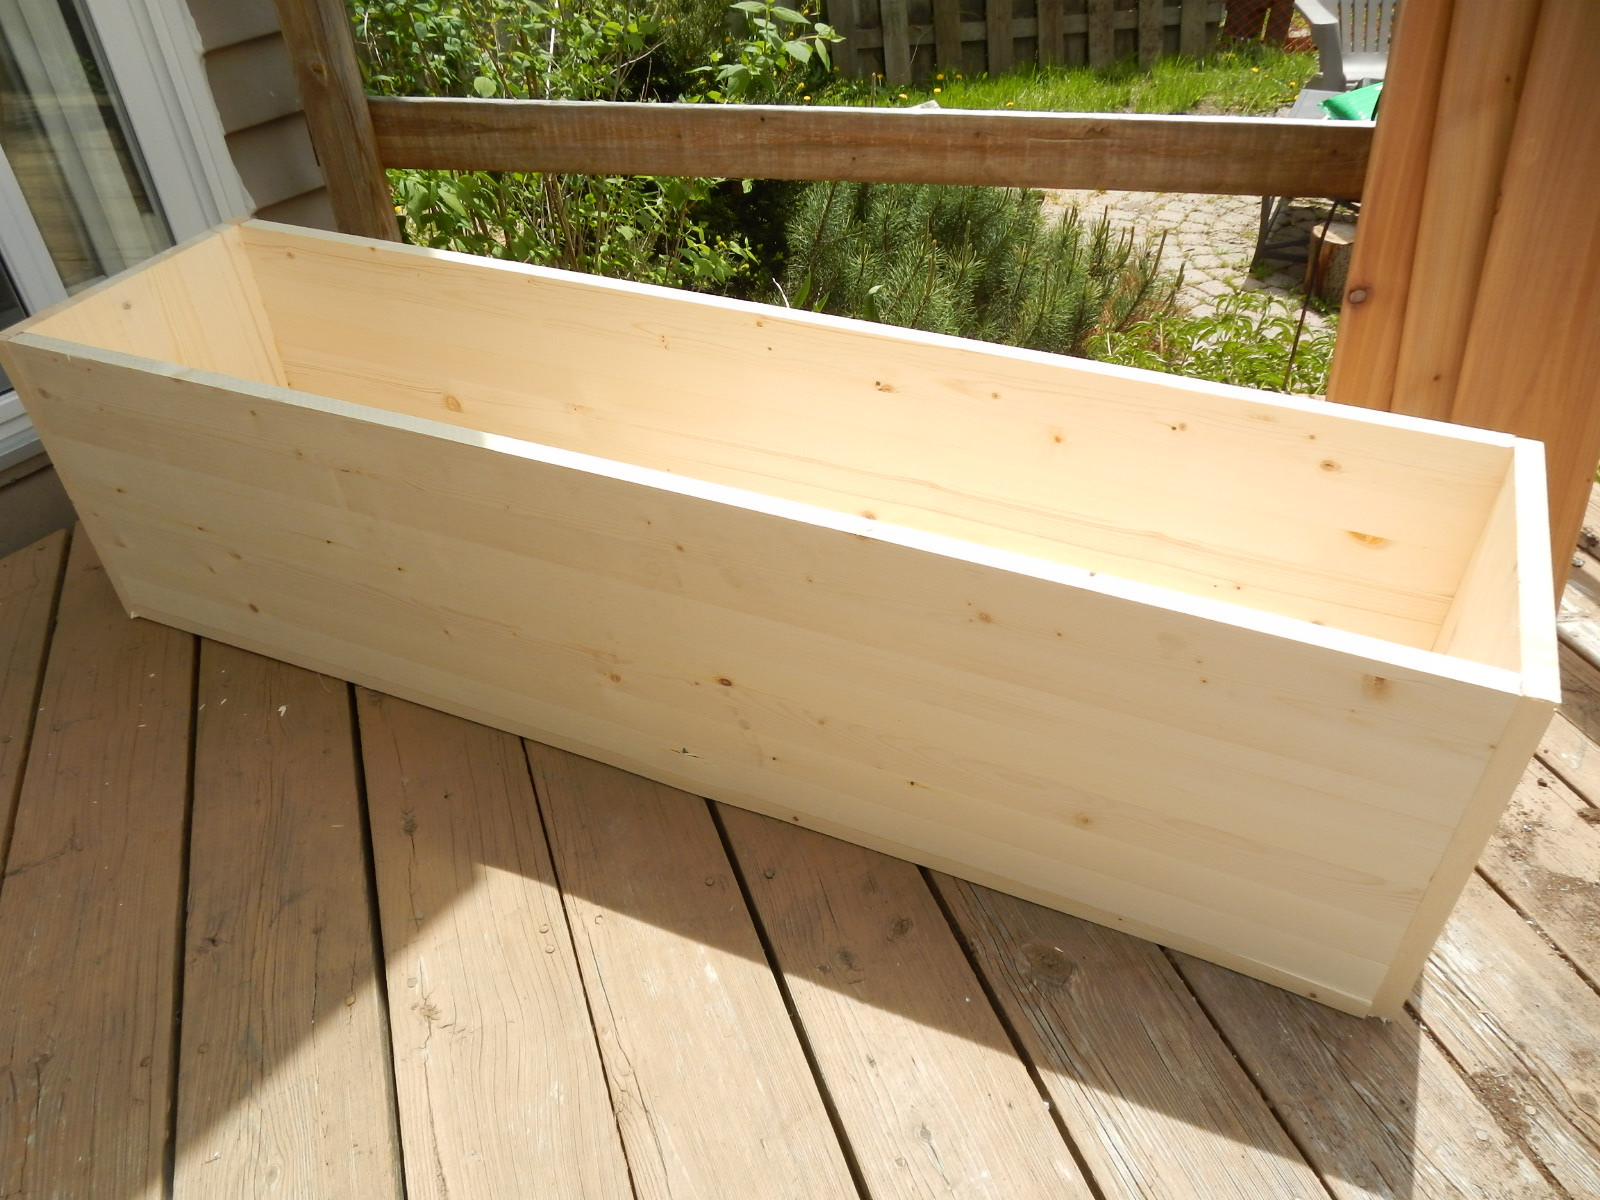 DIY Wooden Planter Box
 Planting for Privacy – DIY Wood Planter